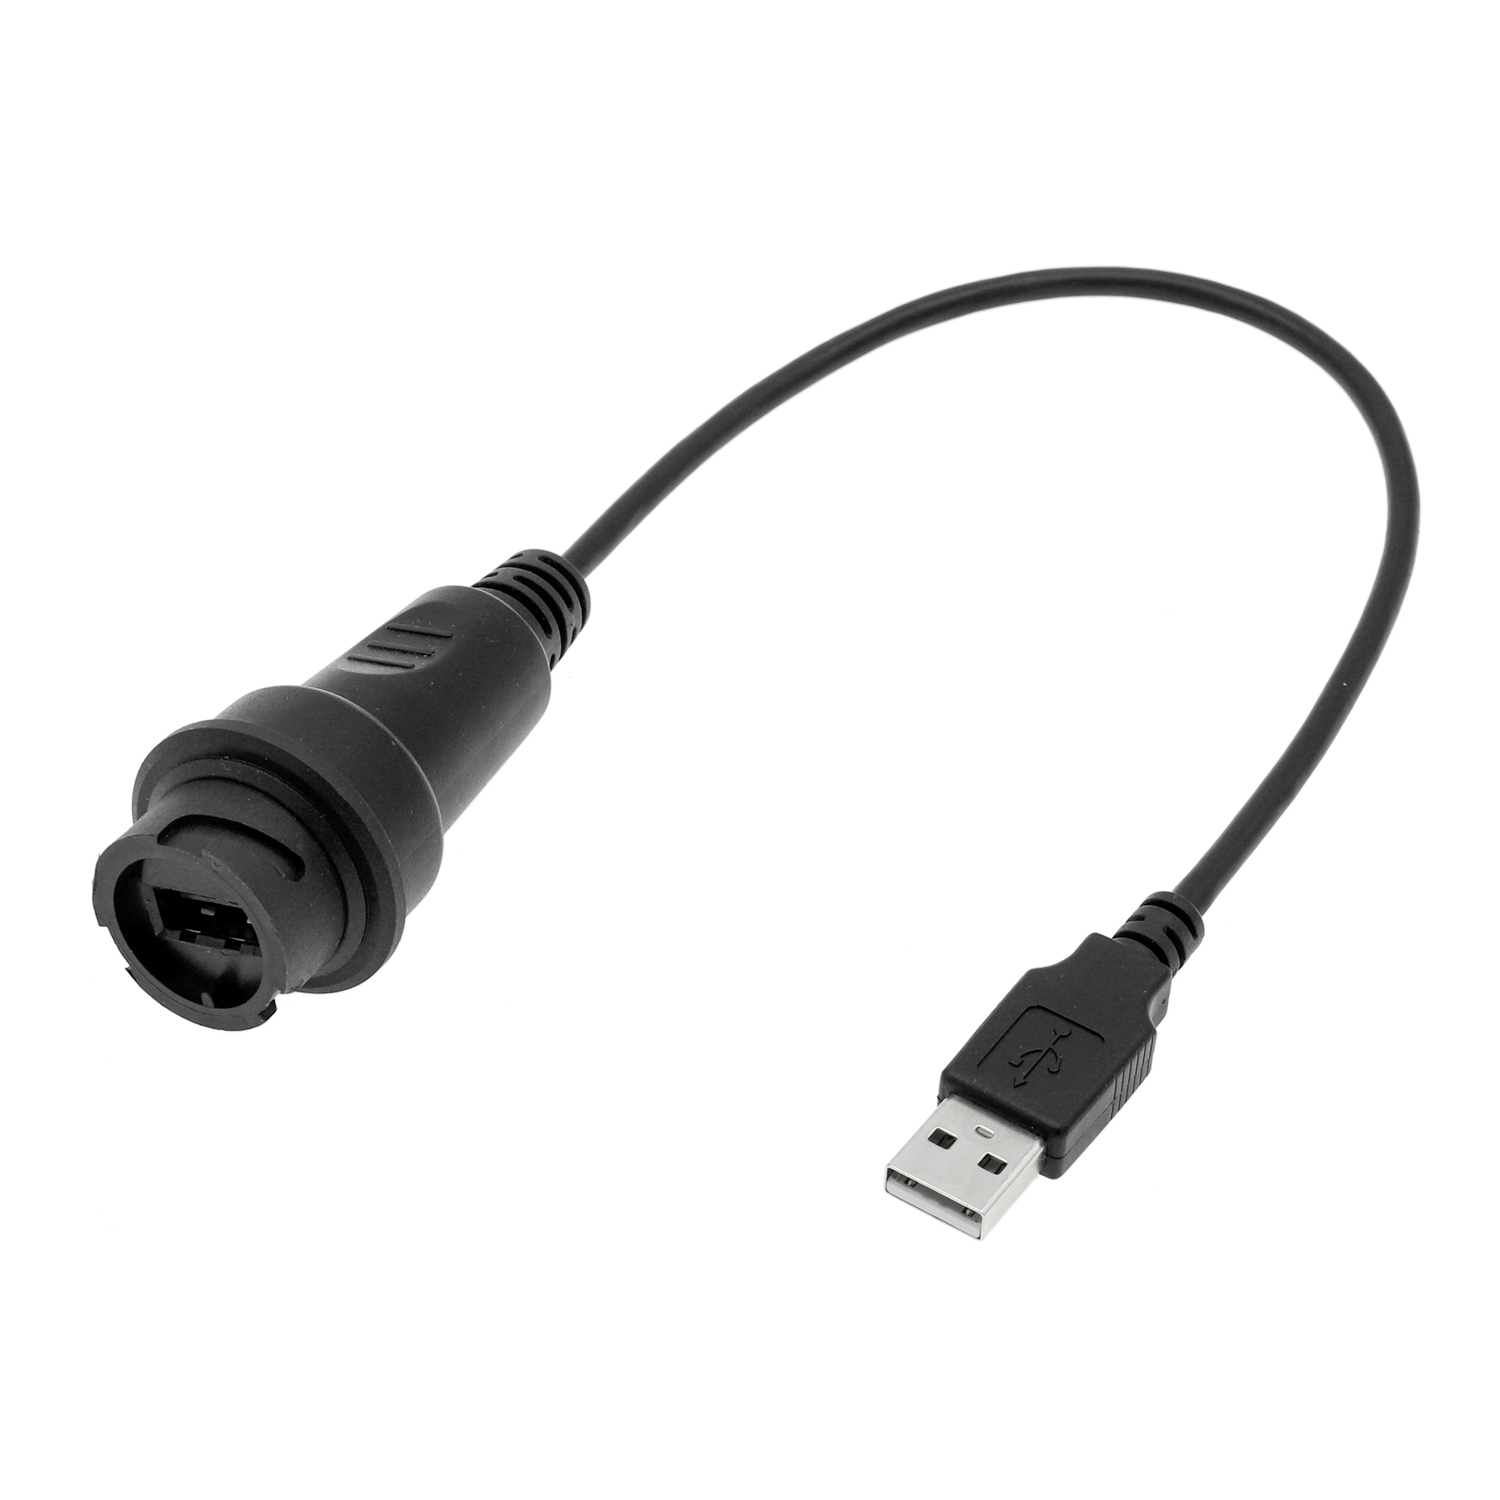 HDMI Cable to USB A Male Waterproof Connector for Automobile 